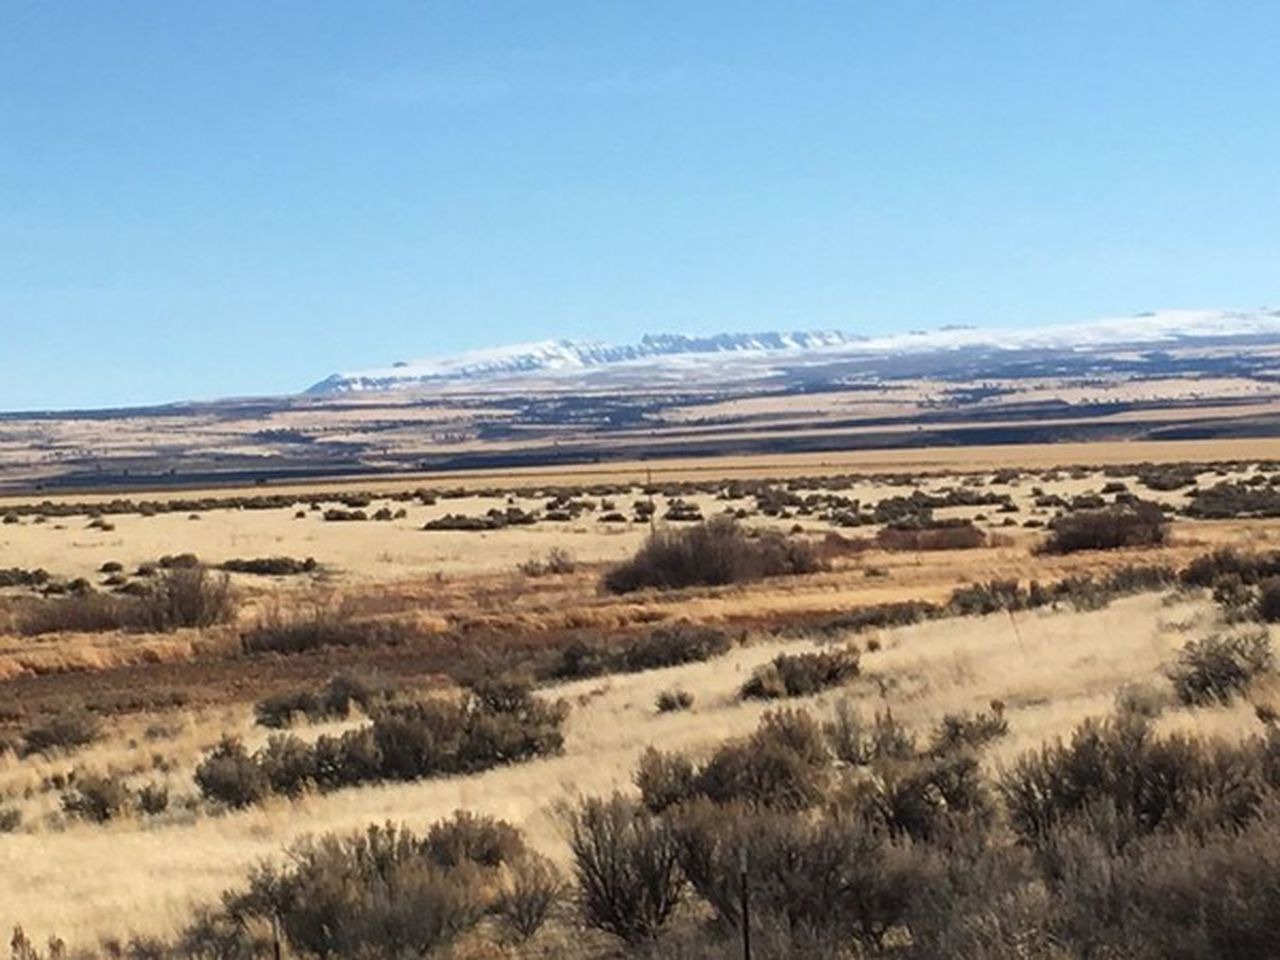 An open letter to the Oregon Bureau of Land Management on Hammond Ranches, Inc. proposed permit